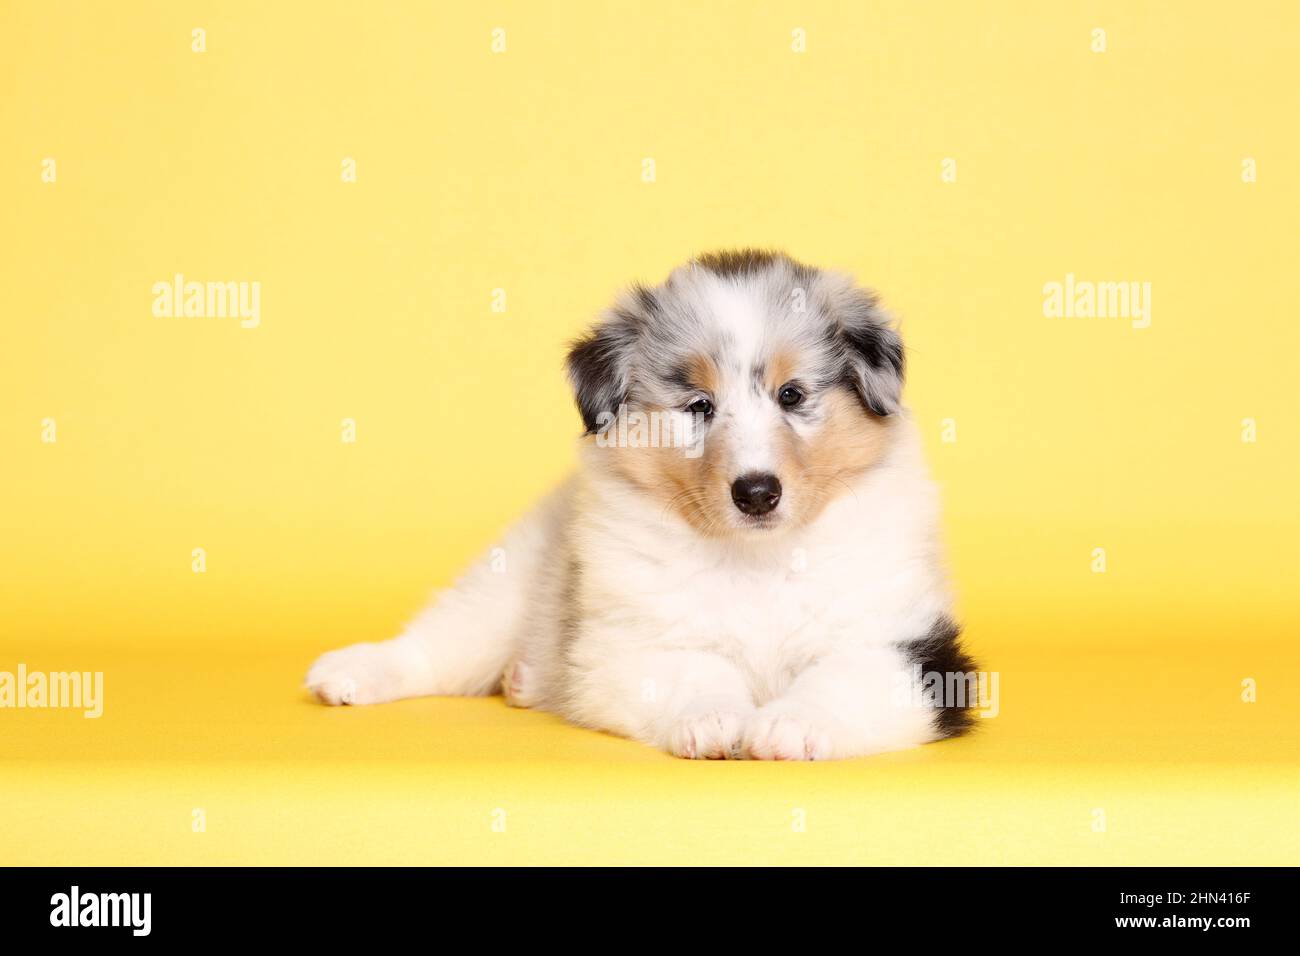 American Collie, Long-haired Collie. Puppy lying. Studio picture against a yellow background. Germany Stock Photo